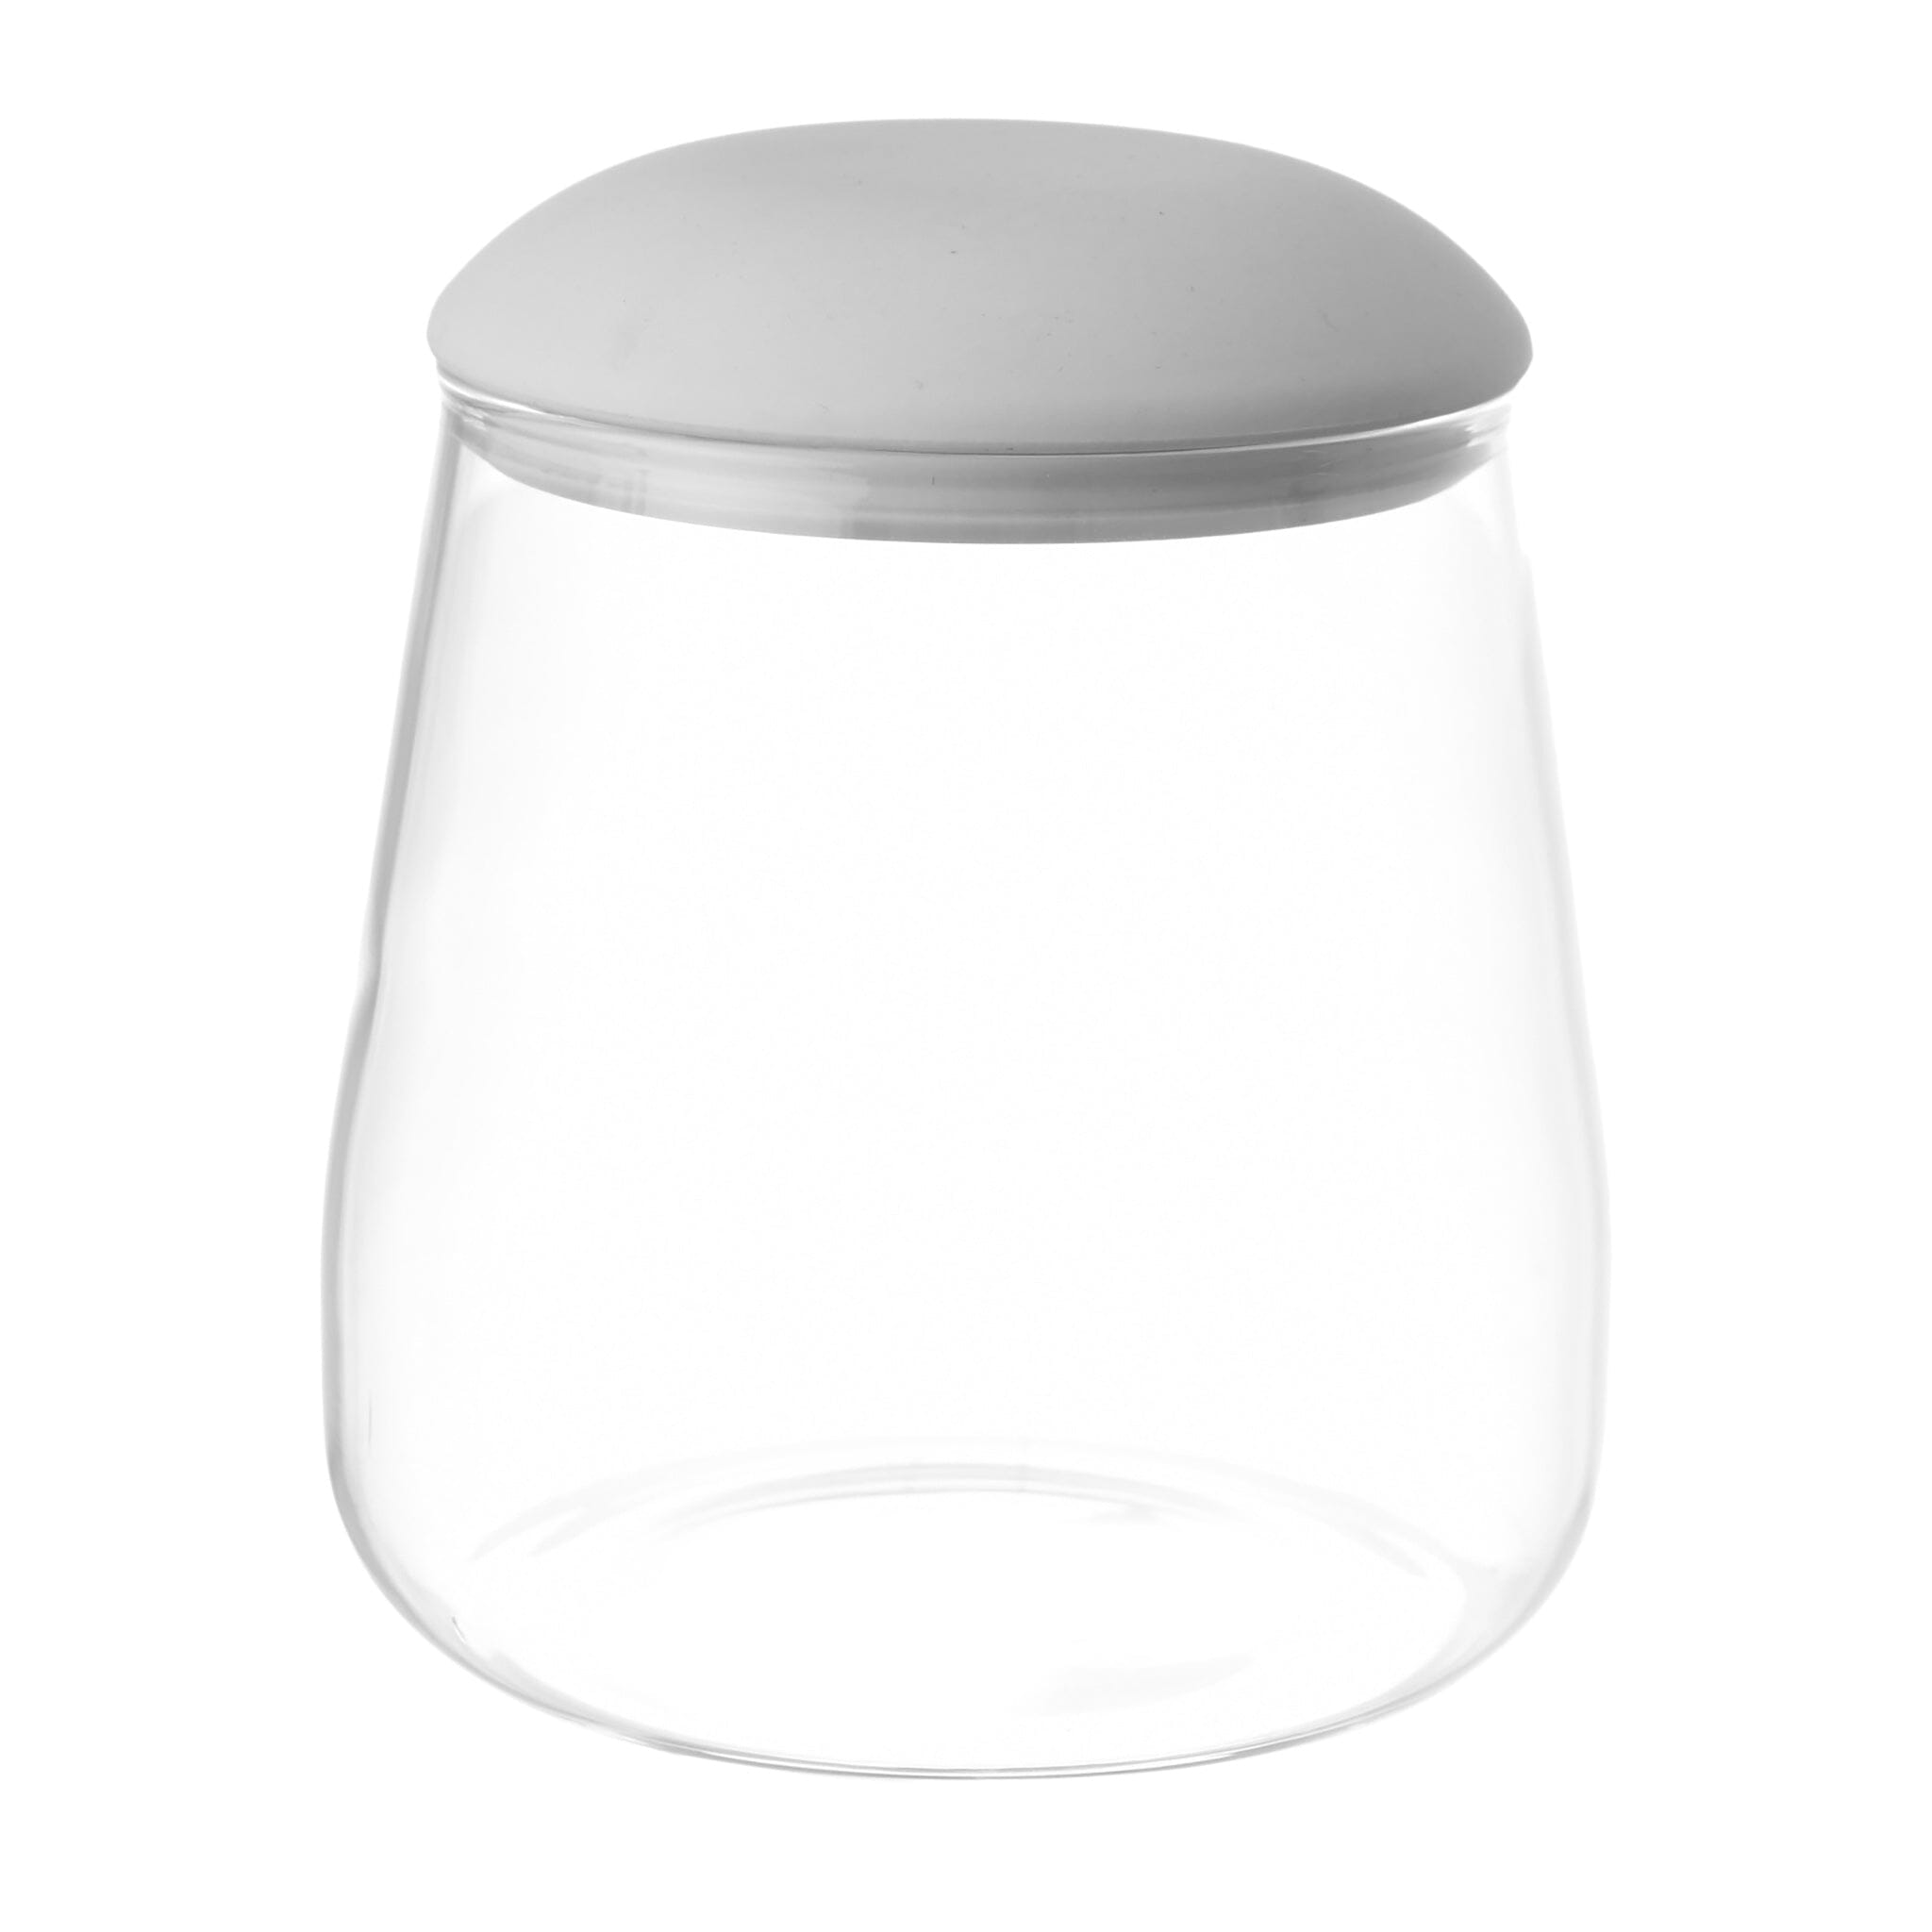 O'lala - Glass Jar with Silicone Cover - White - 8x10cm - 520008158